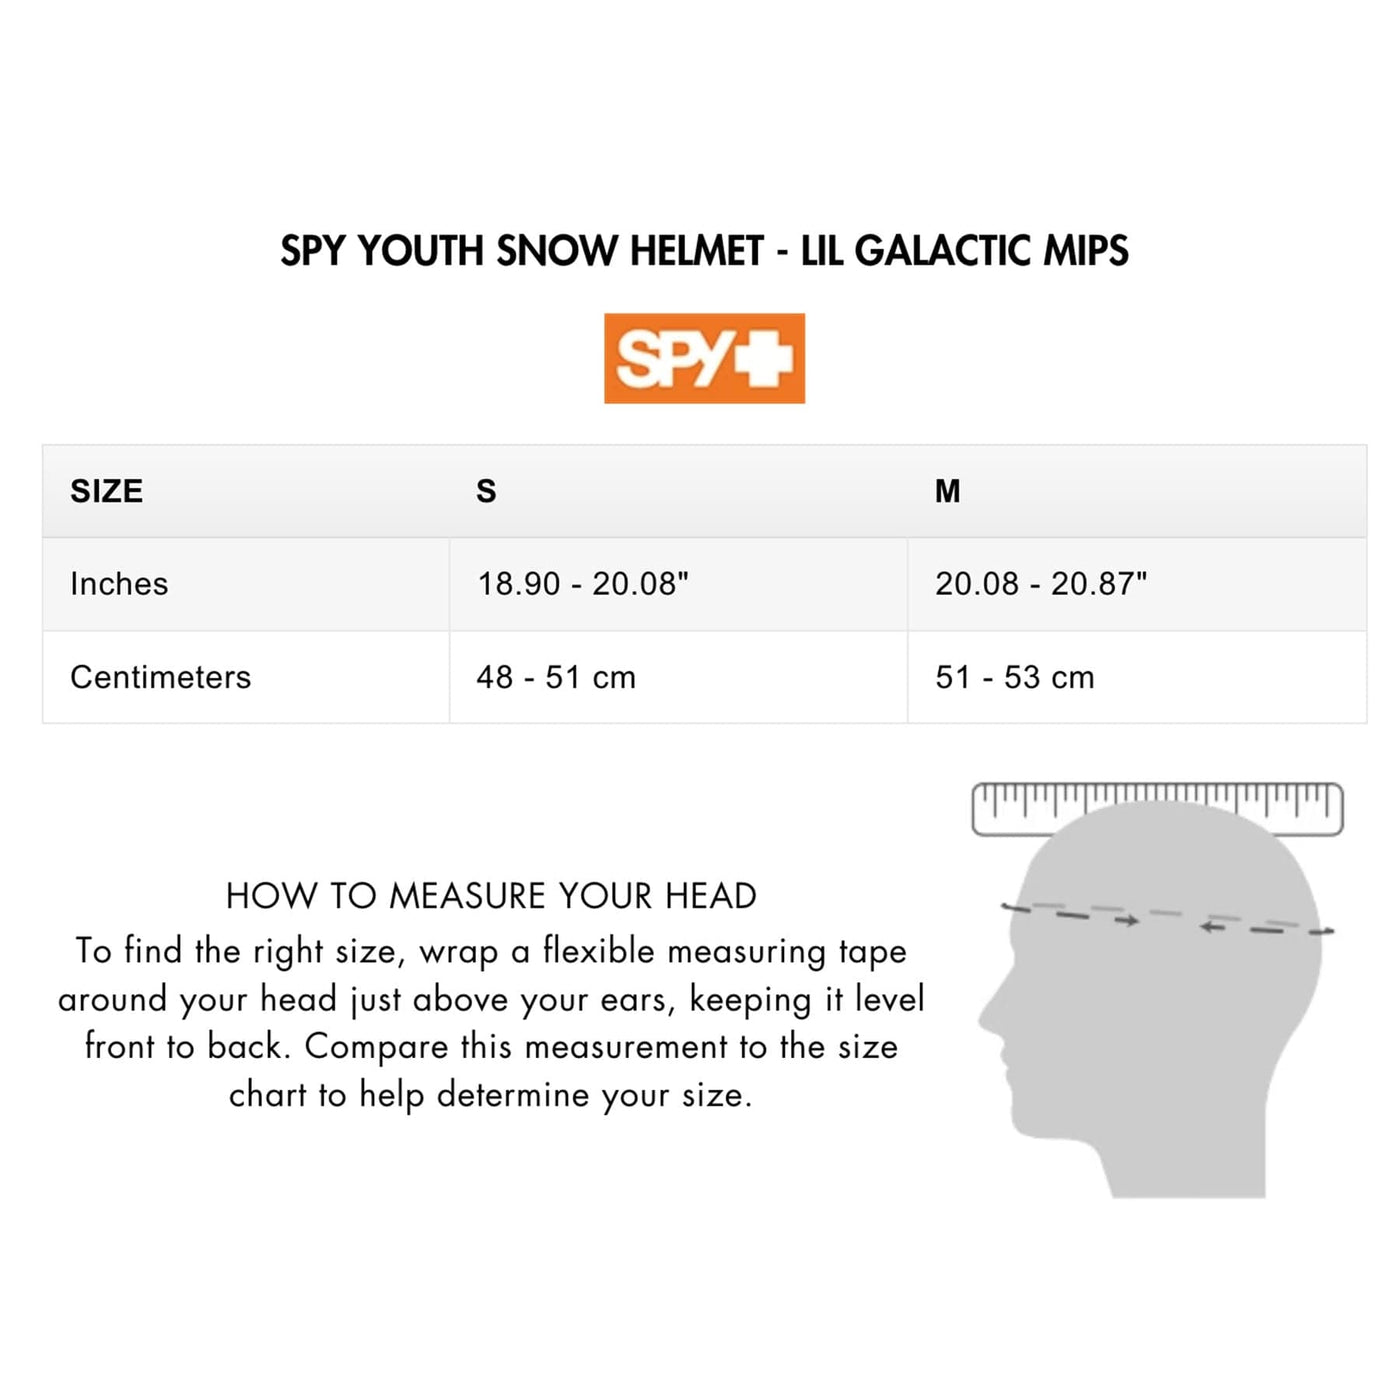 SPY YOUTH SNOW HELMET - LIL GALACTIC MIPS  SIZE CHART